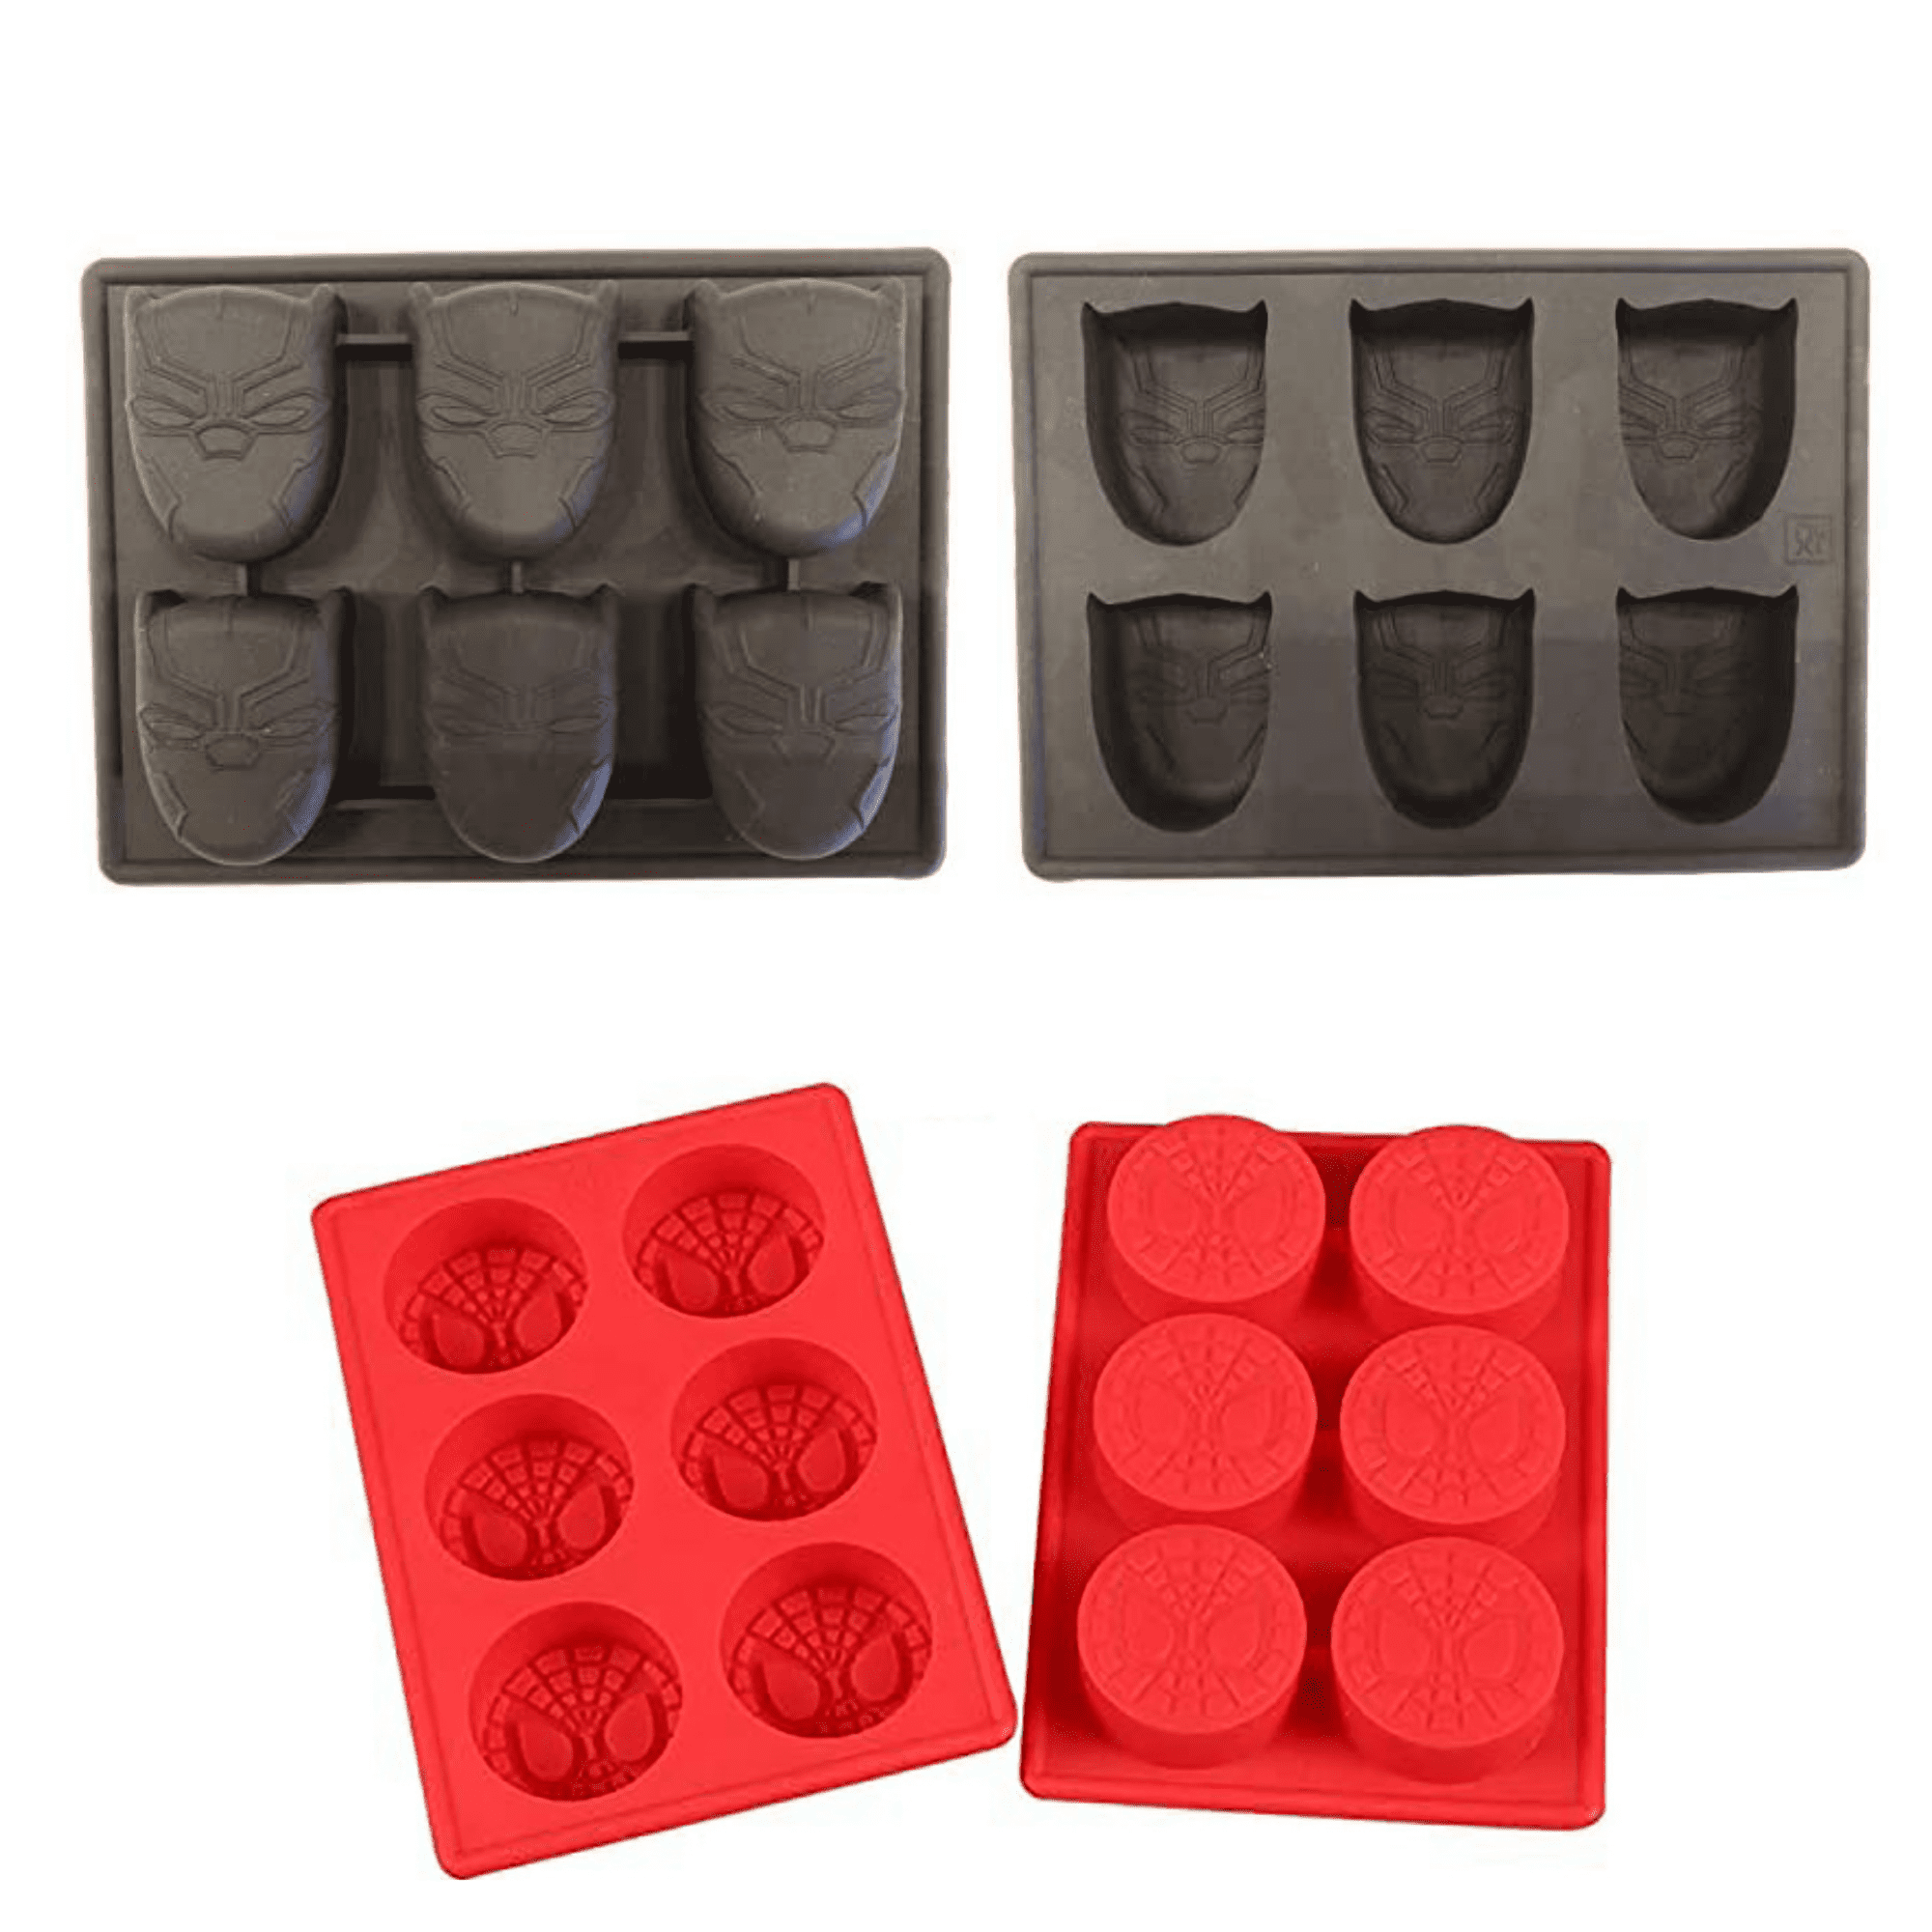 NEW BLACK PANTHER SILICONE CHOCOLATE CANDY MOLD ICE TRAY SUPERHERO PARTY SUPPL 